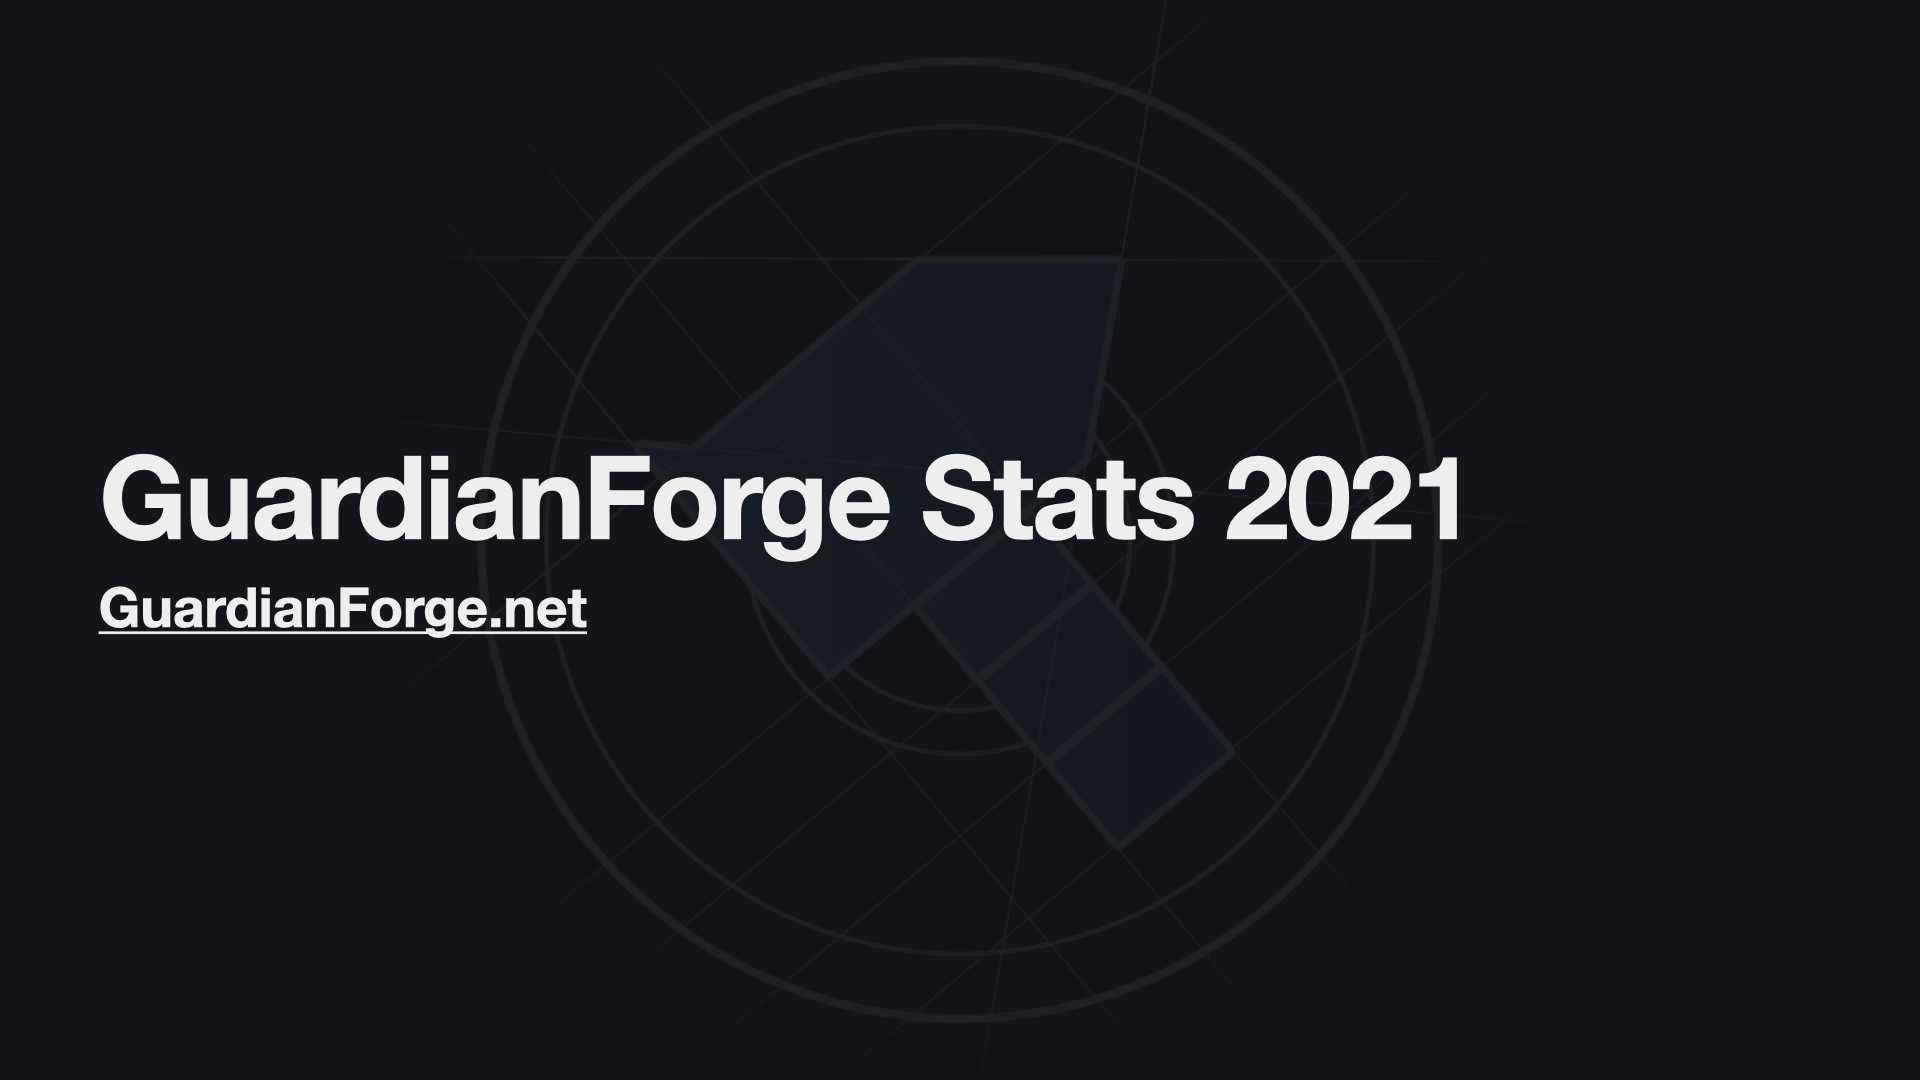 "GuardianForge Stats 2021" Featured Image